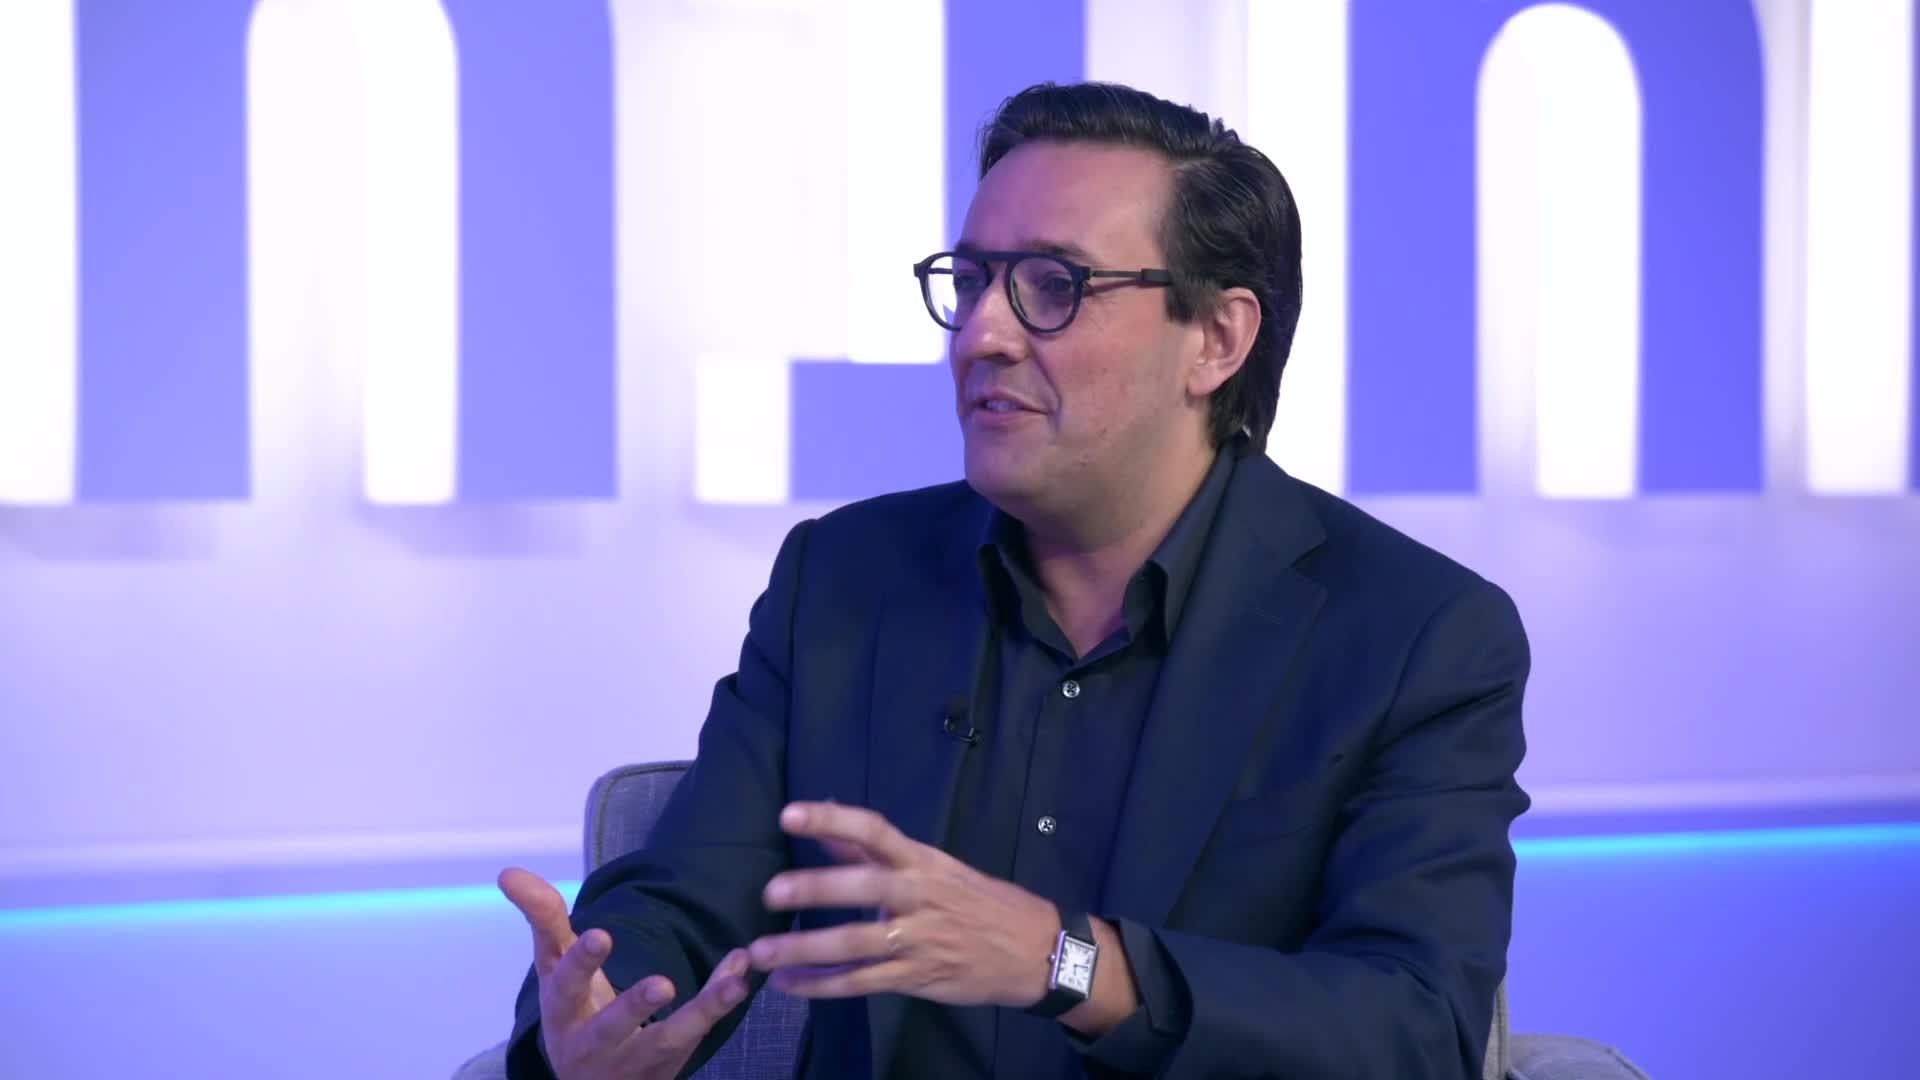 Interview with Dario Gil, SVP and Director of Research at IBM.